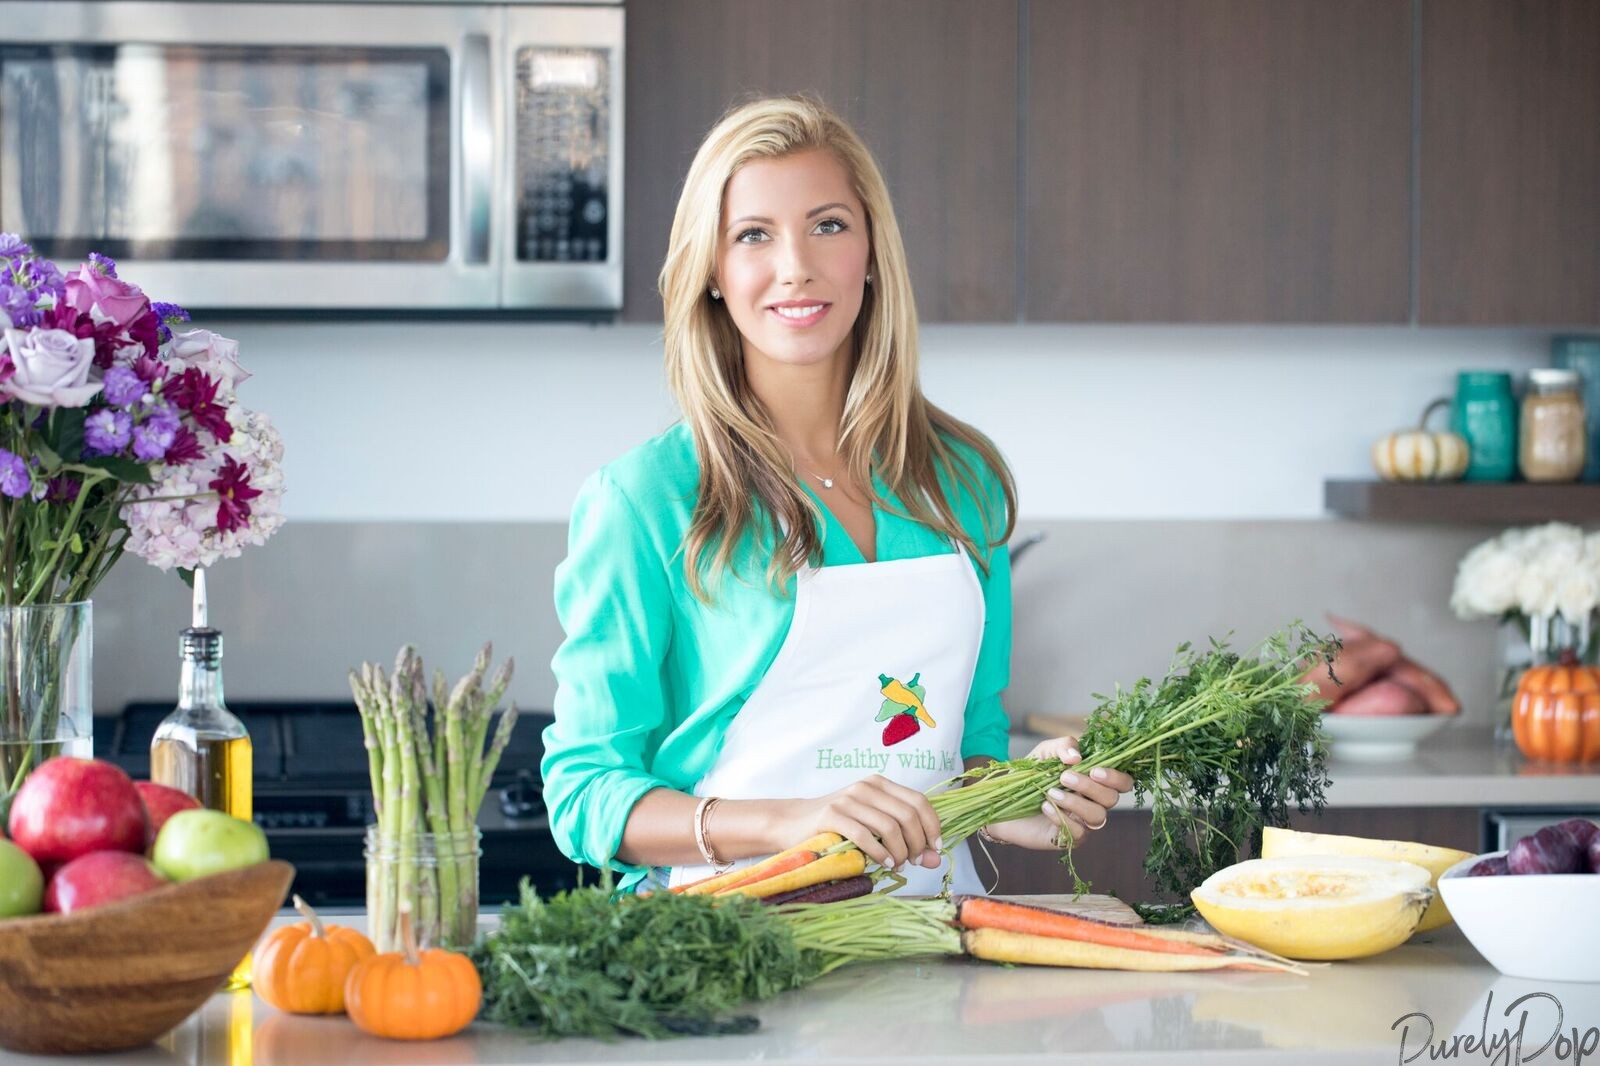 Wellness - Balancing a Healthy Lifestyle @HealthyWithNedi - PurelyPope